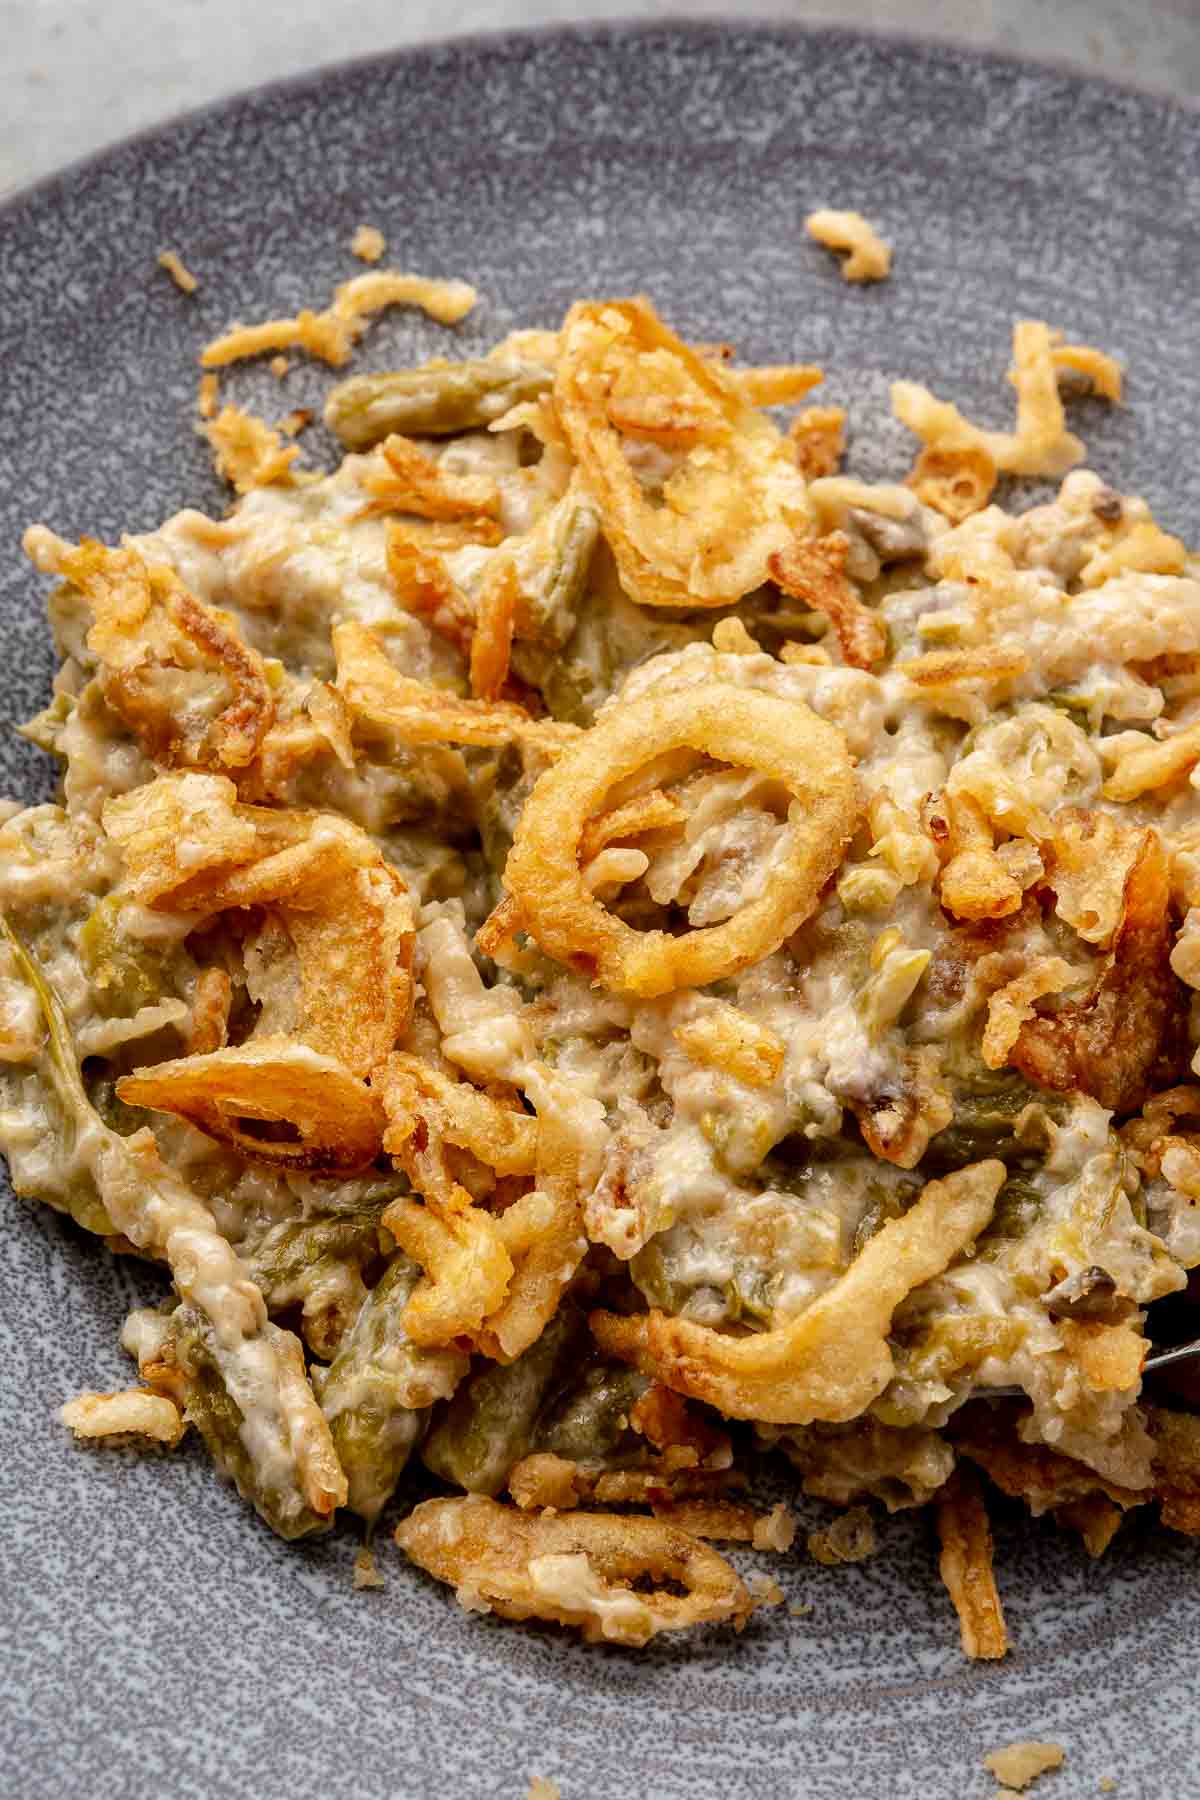 A serving of green bean casserole served on a gray plate.